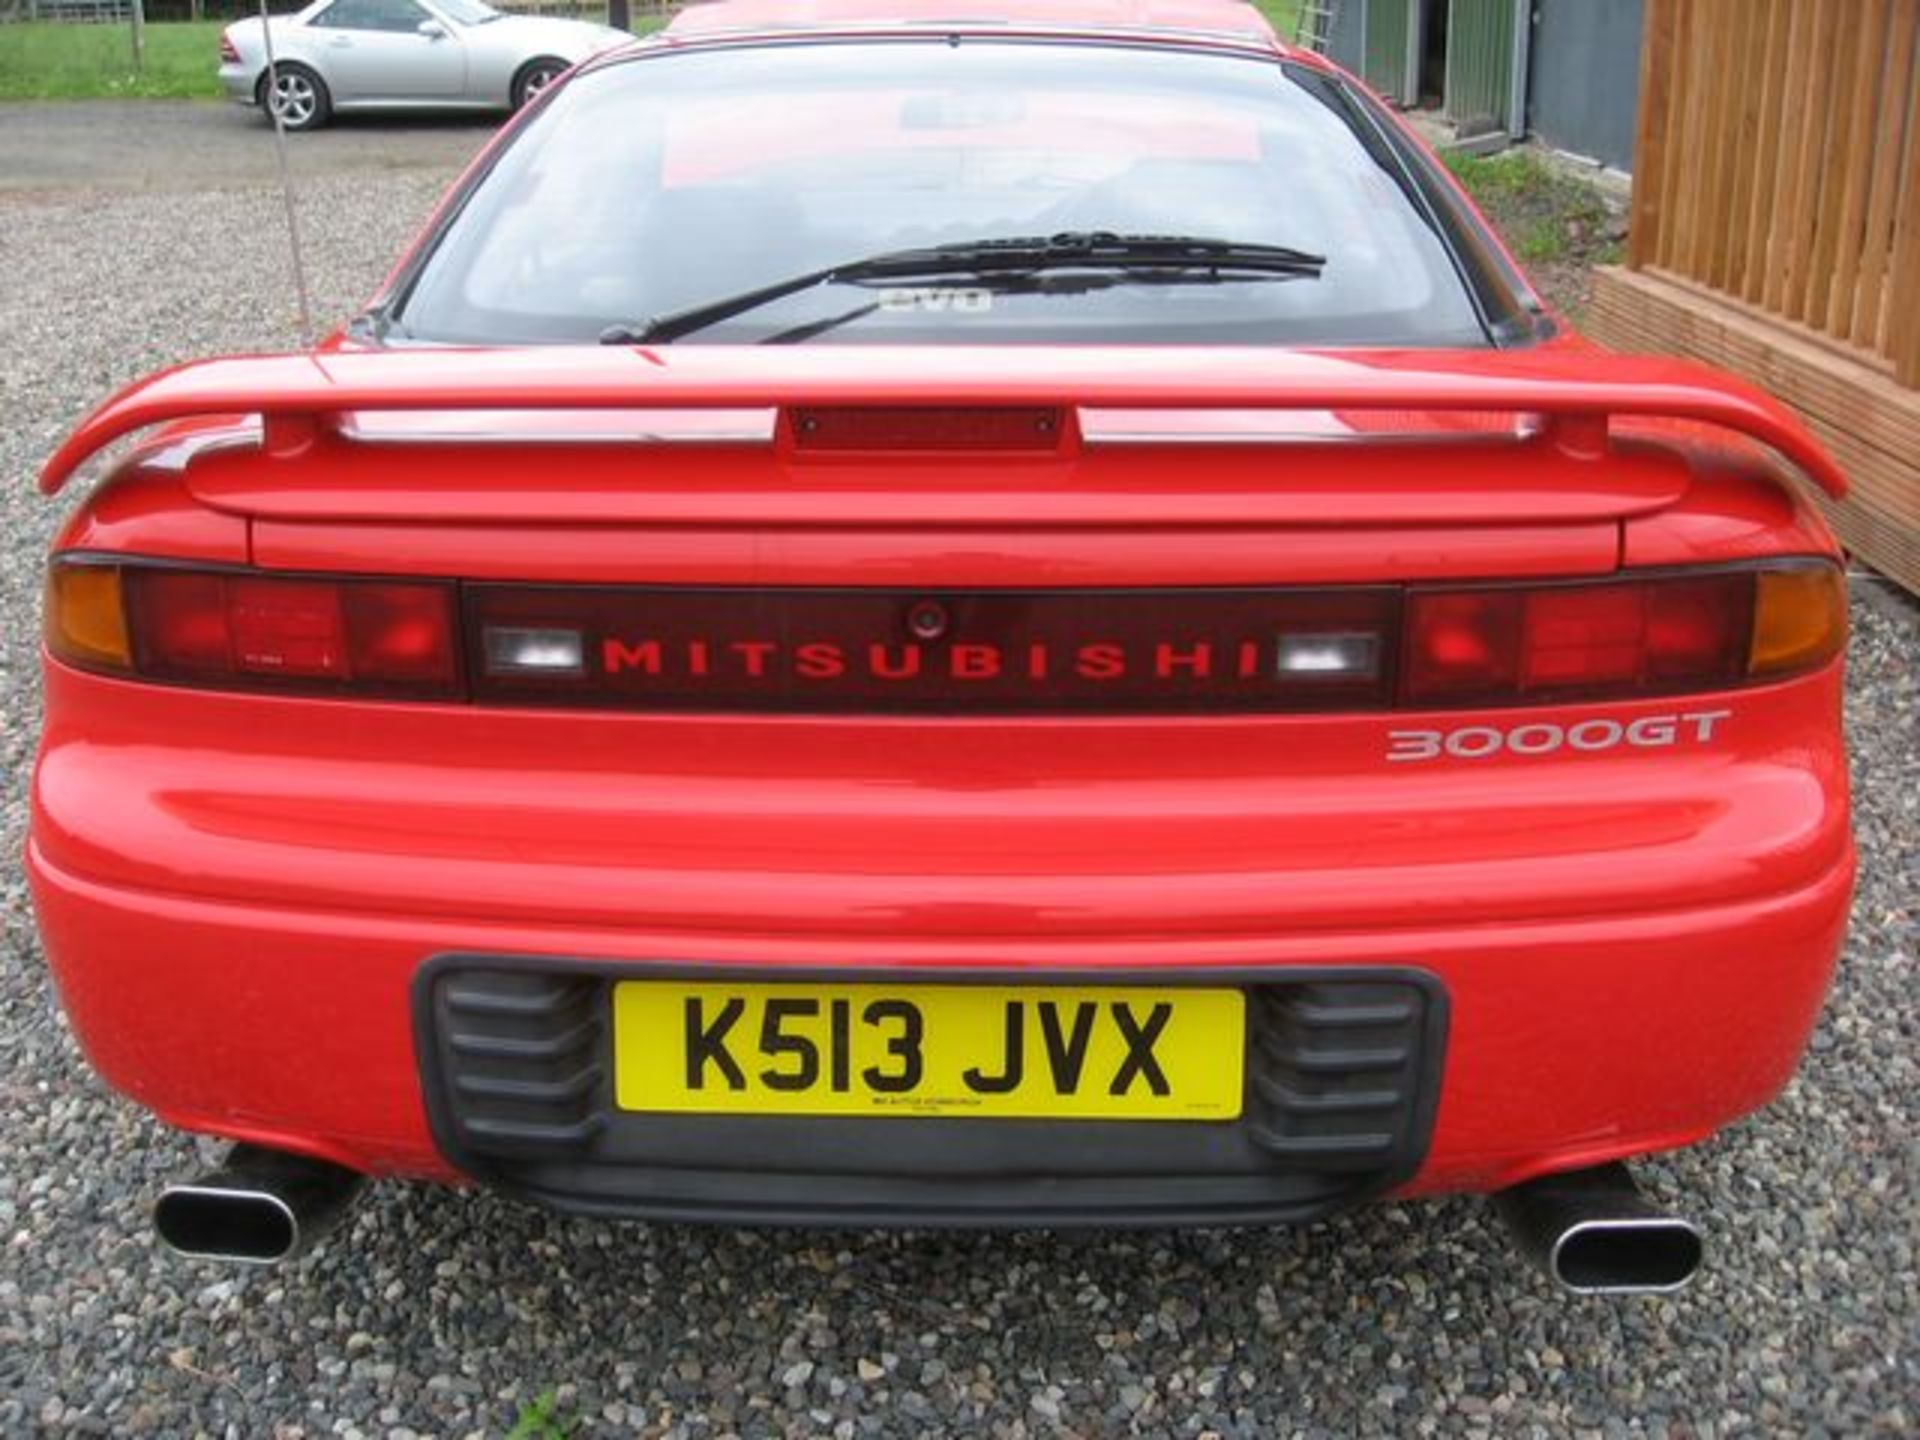 MITSUBISHI, 3000 GT V6 TURBO - 2972cc, Chassis number JMAMNZ16APY000228 - presented with an - Image 17 of 17